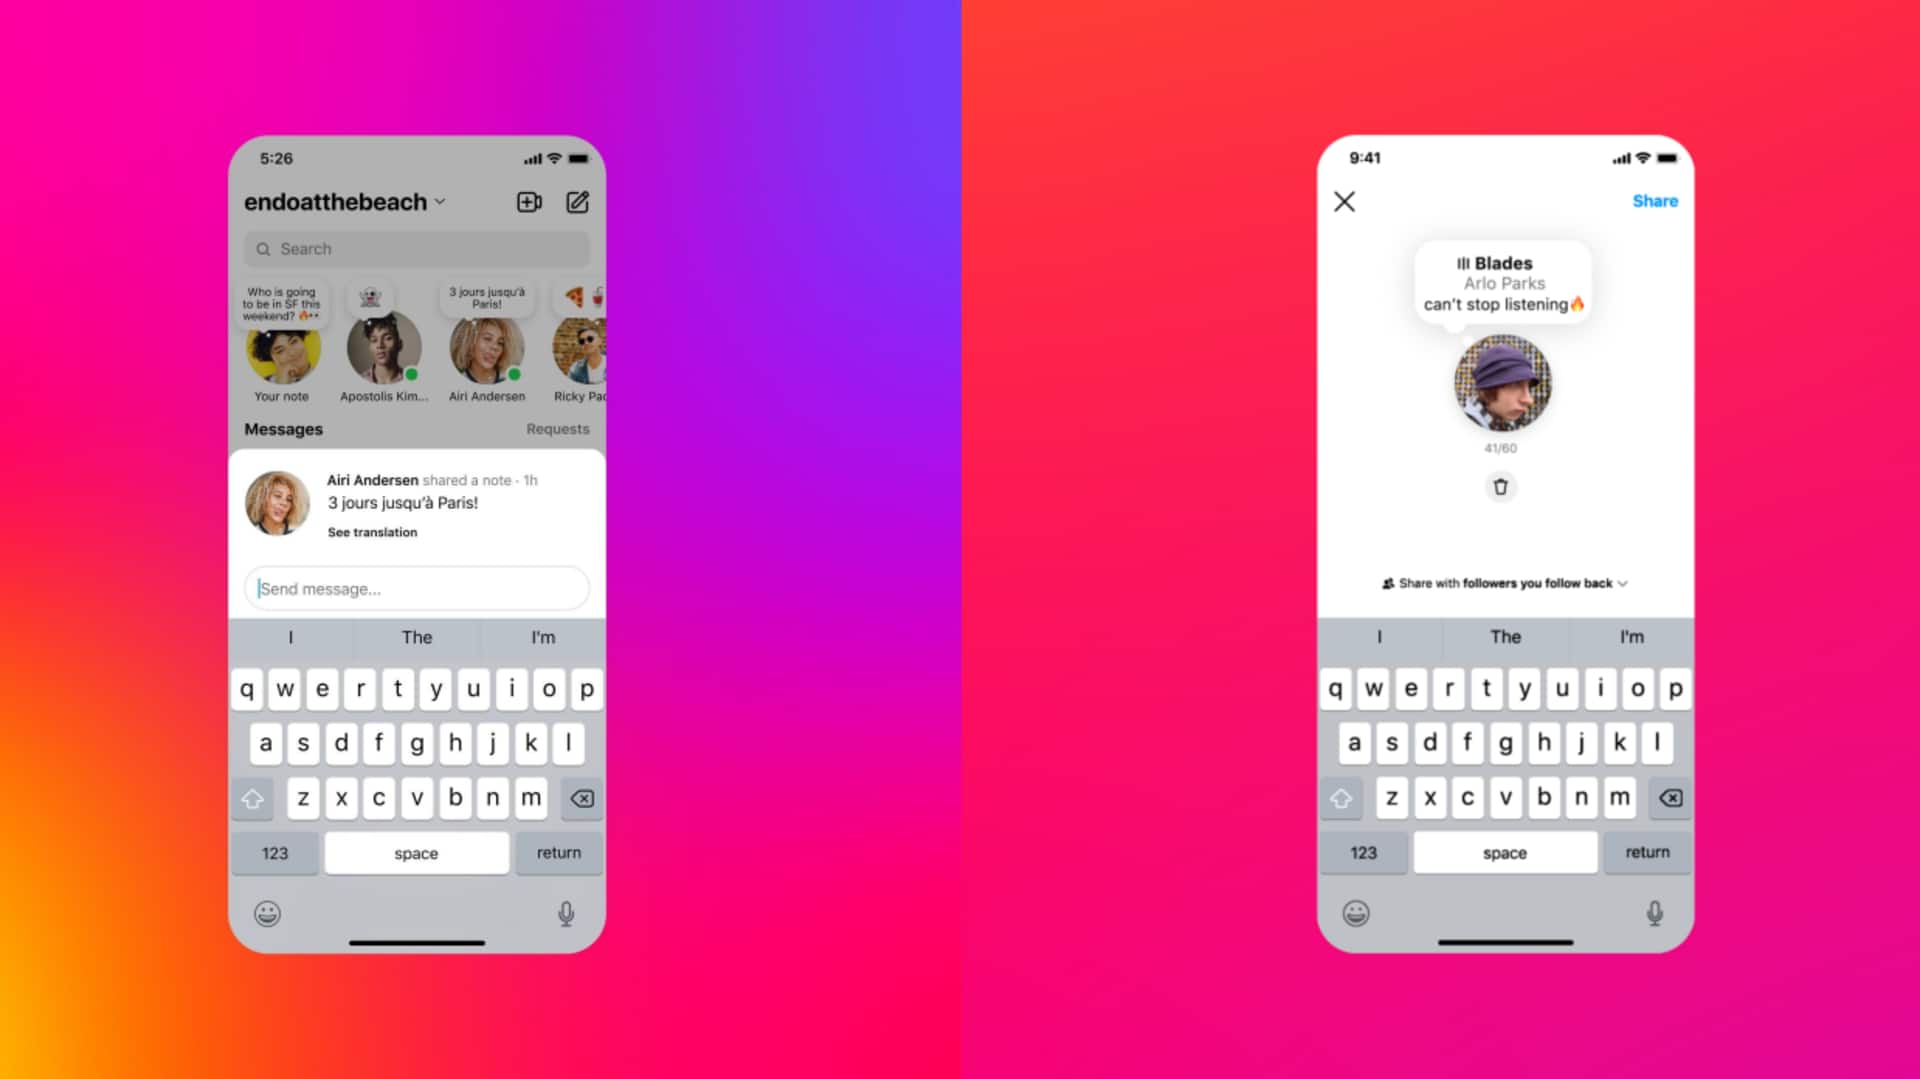 Instagram Notes now allows sharing music and seeing translations